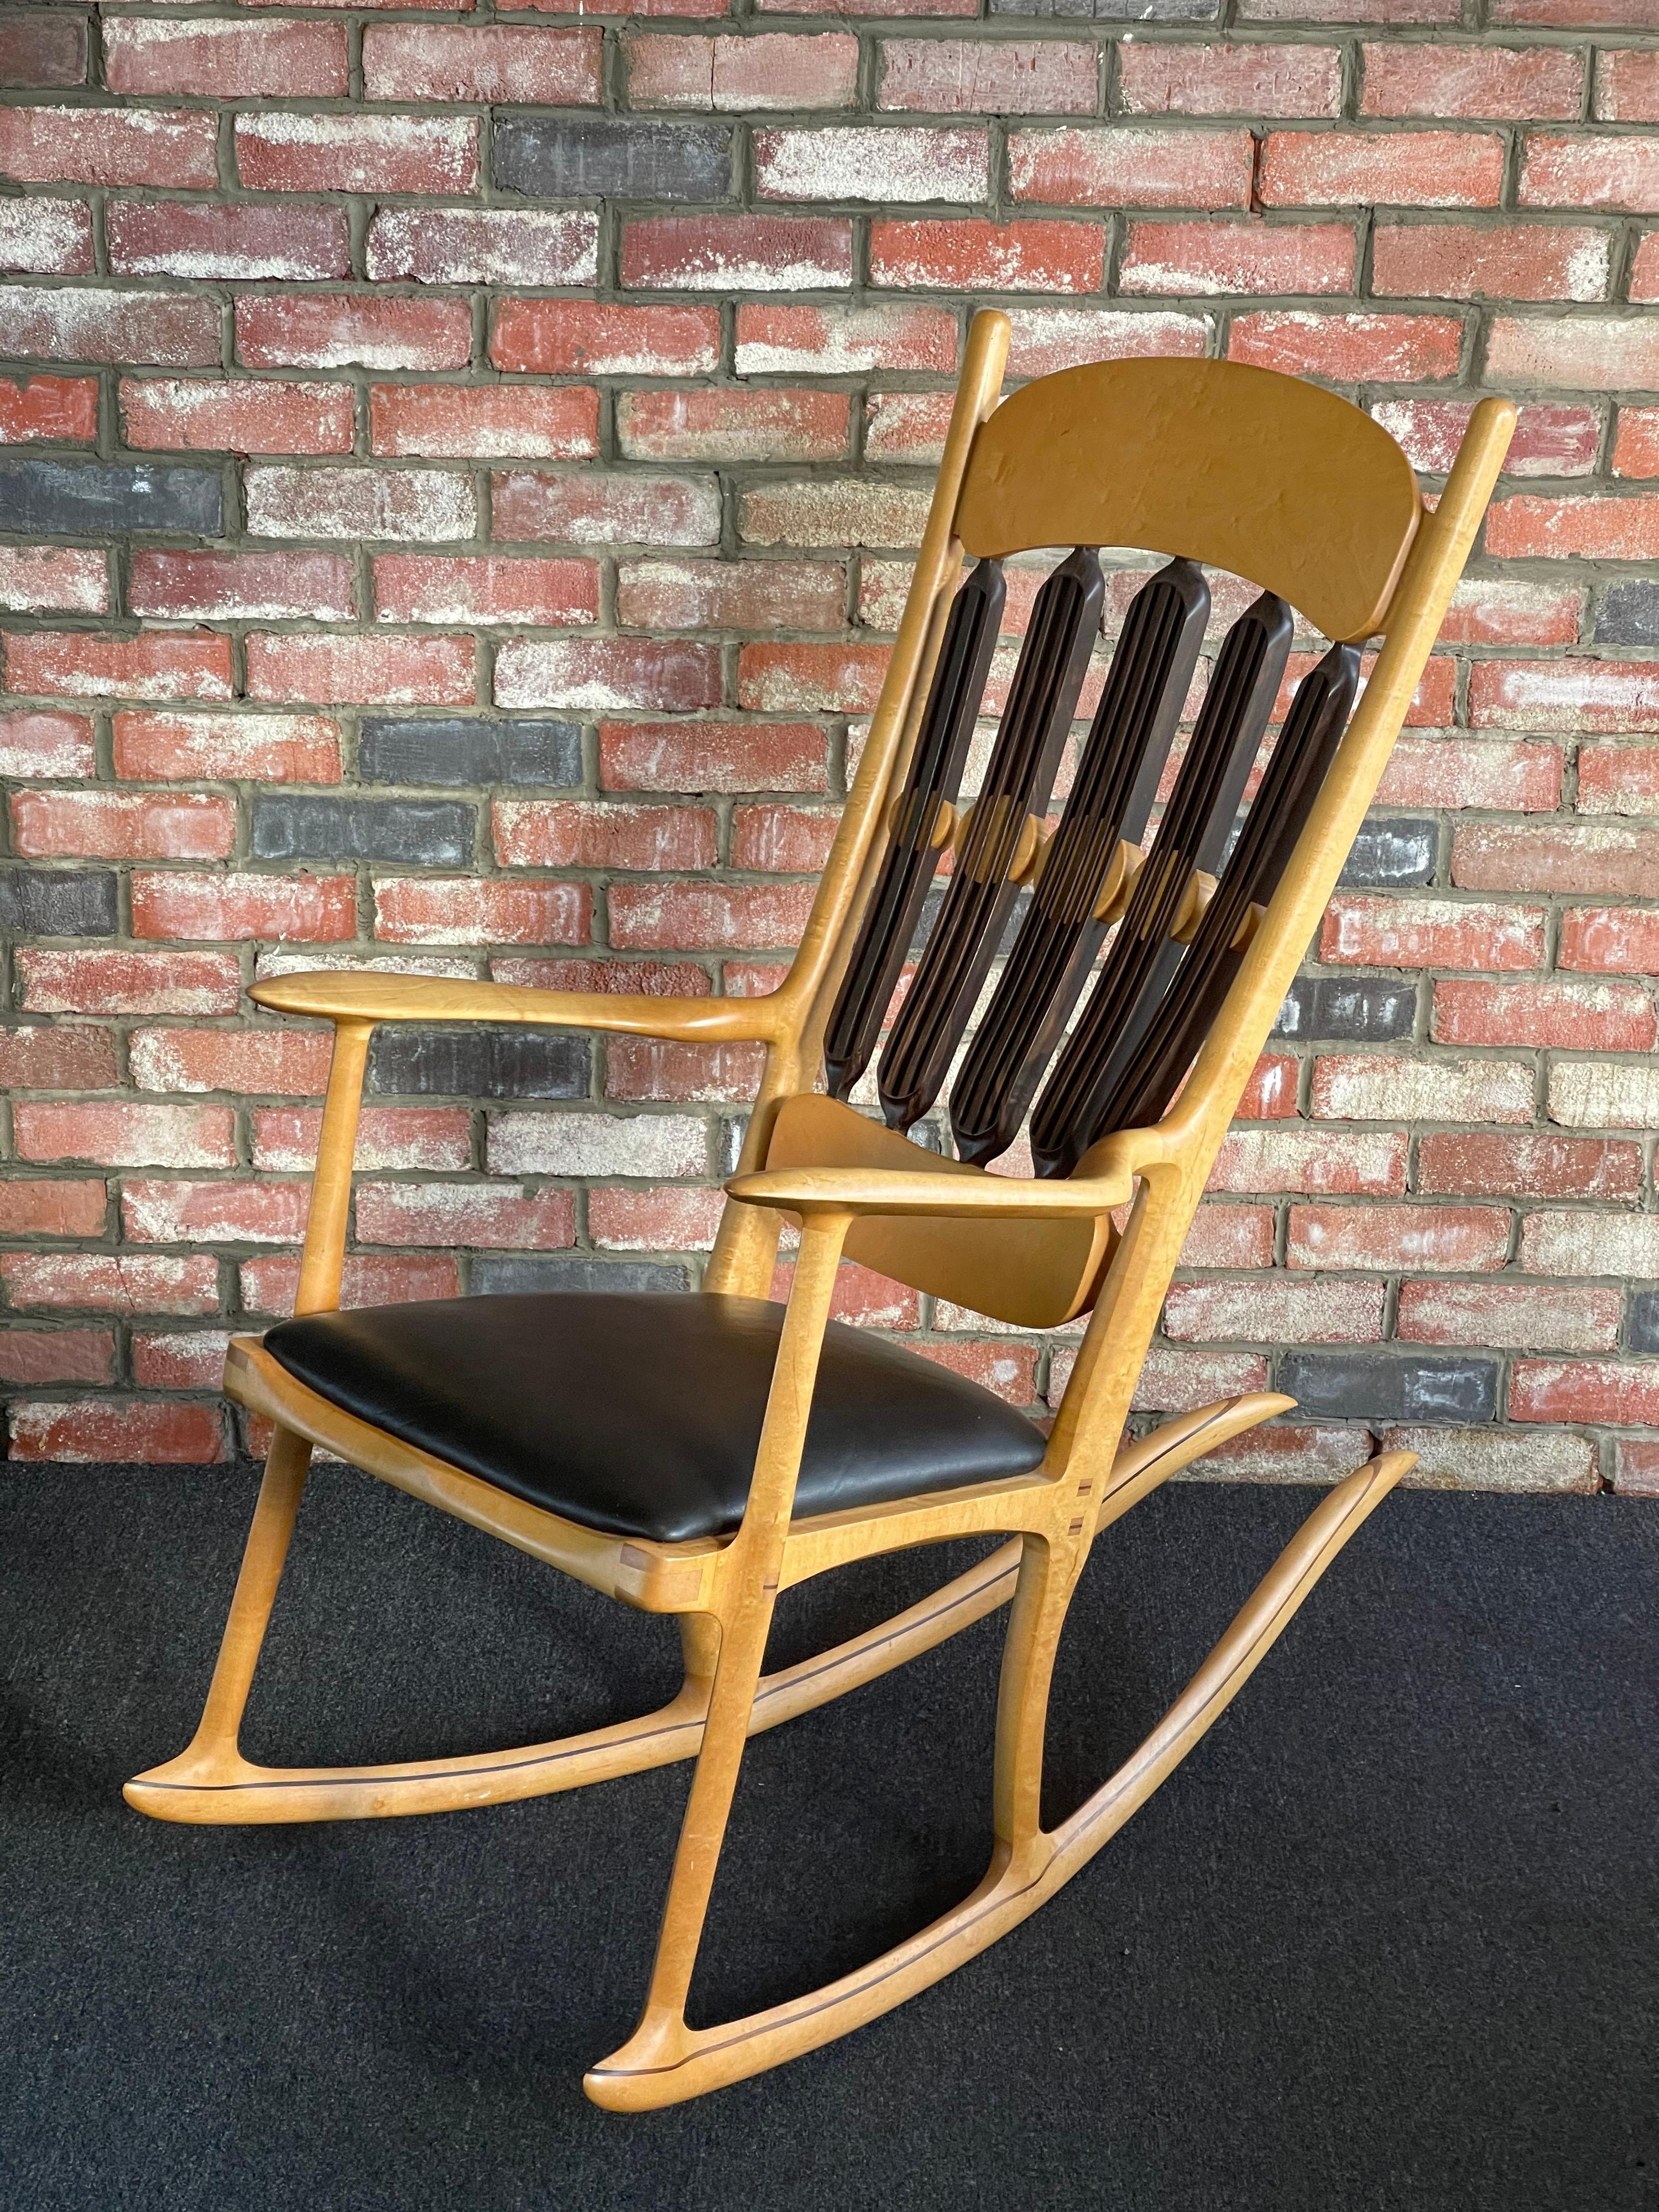  Handcrafted Artisan Studio Rocking Chair by Jeffry Mann 1987 For Sale 5